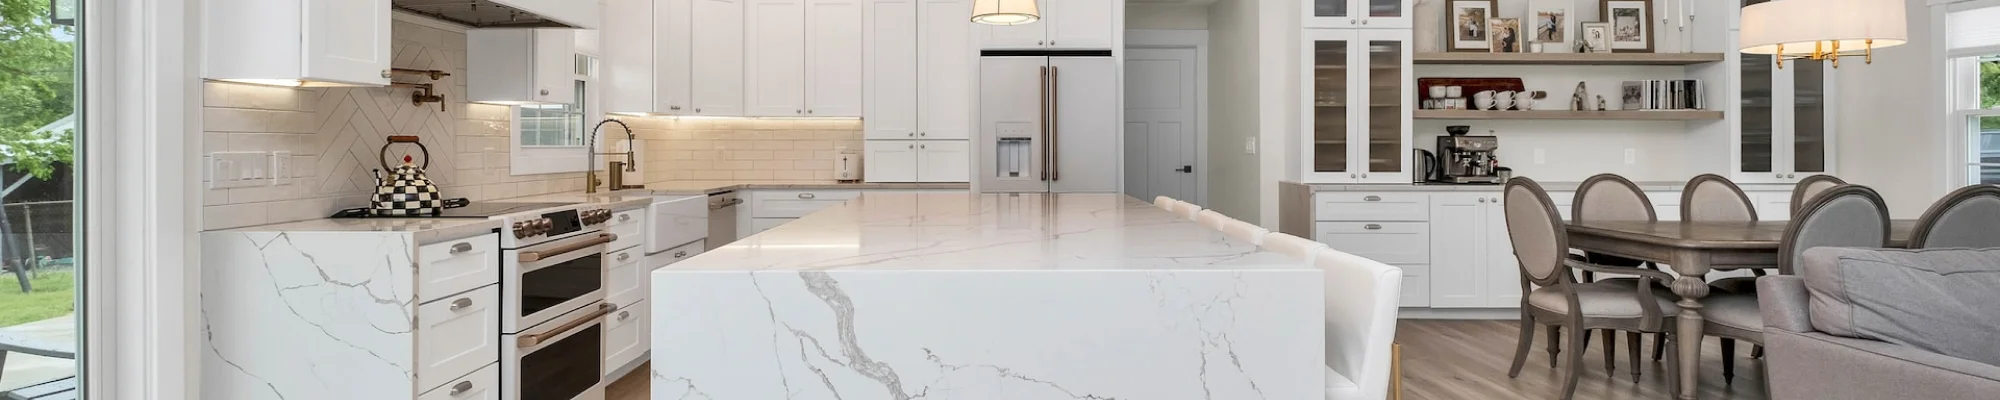 Beautiful countertops info provided by Majestic Floors And More LLC in the Waunakee, Wi area